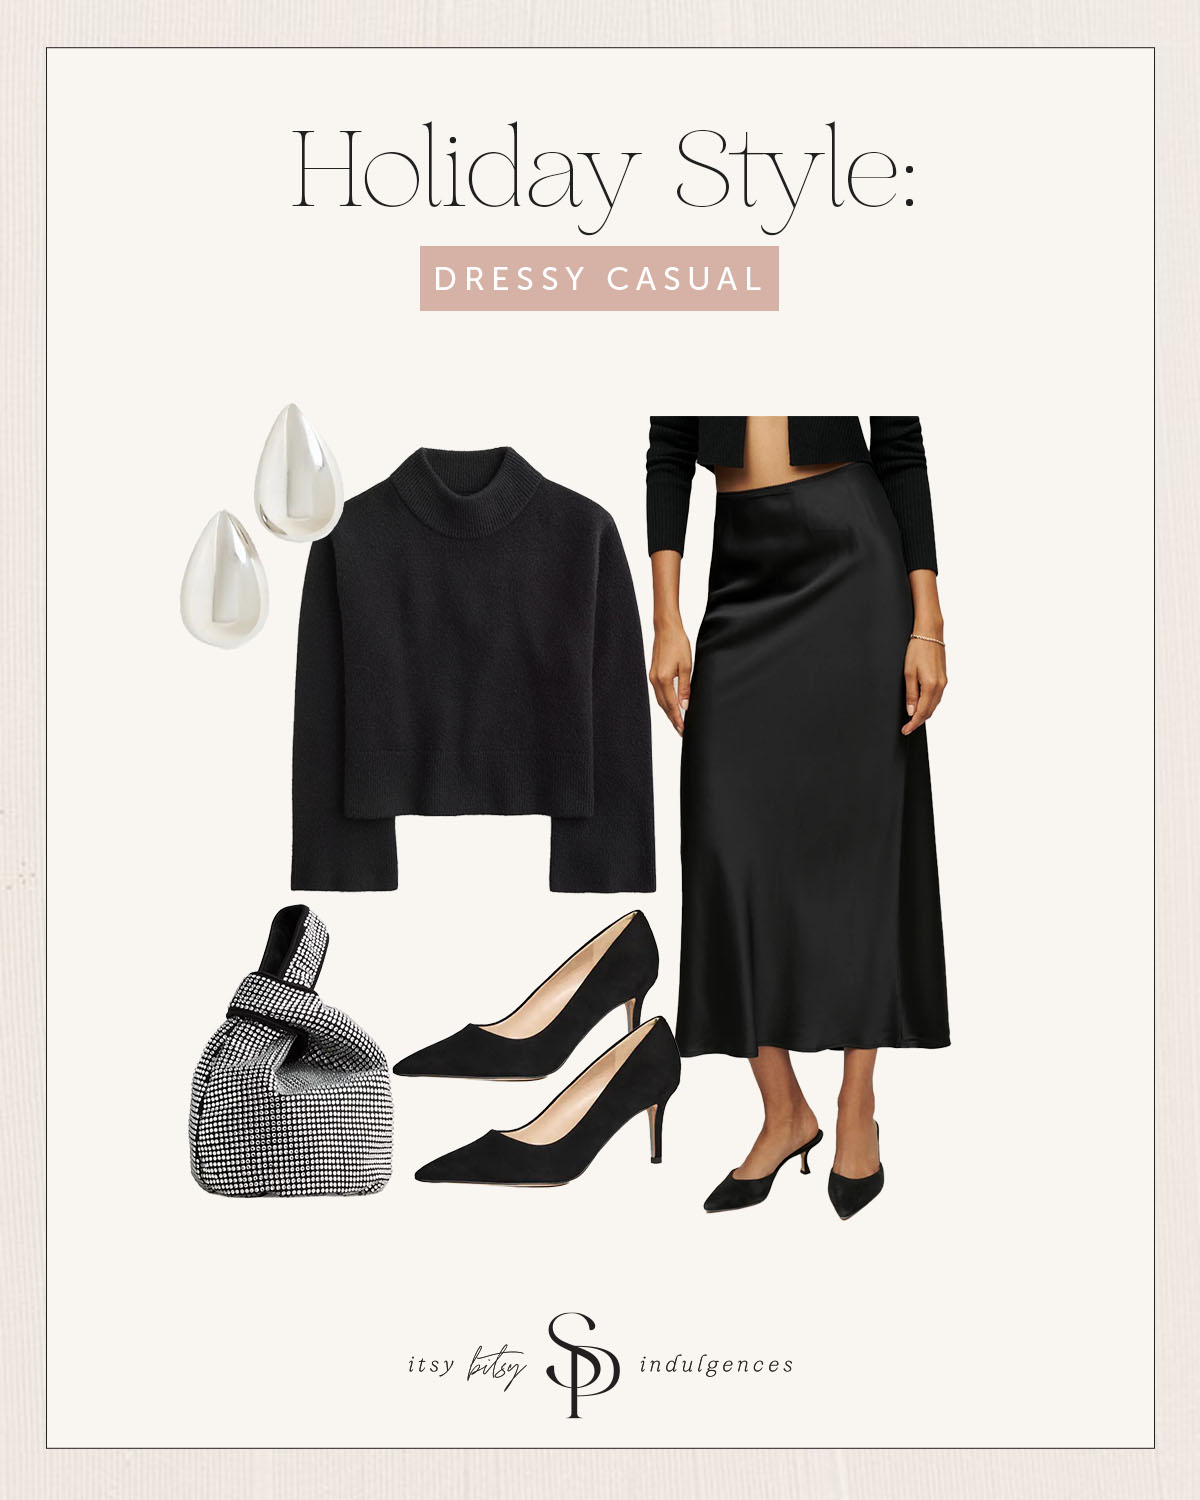 11 Stylish Holiday Outfit Ideas